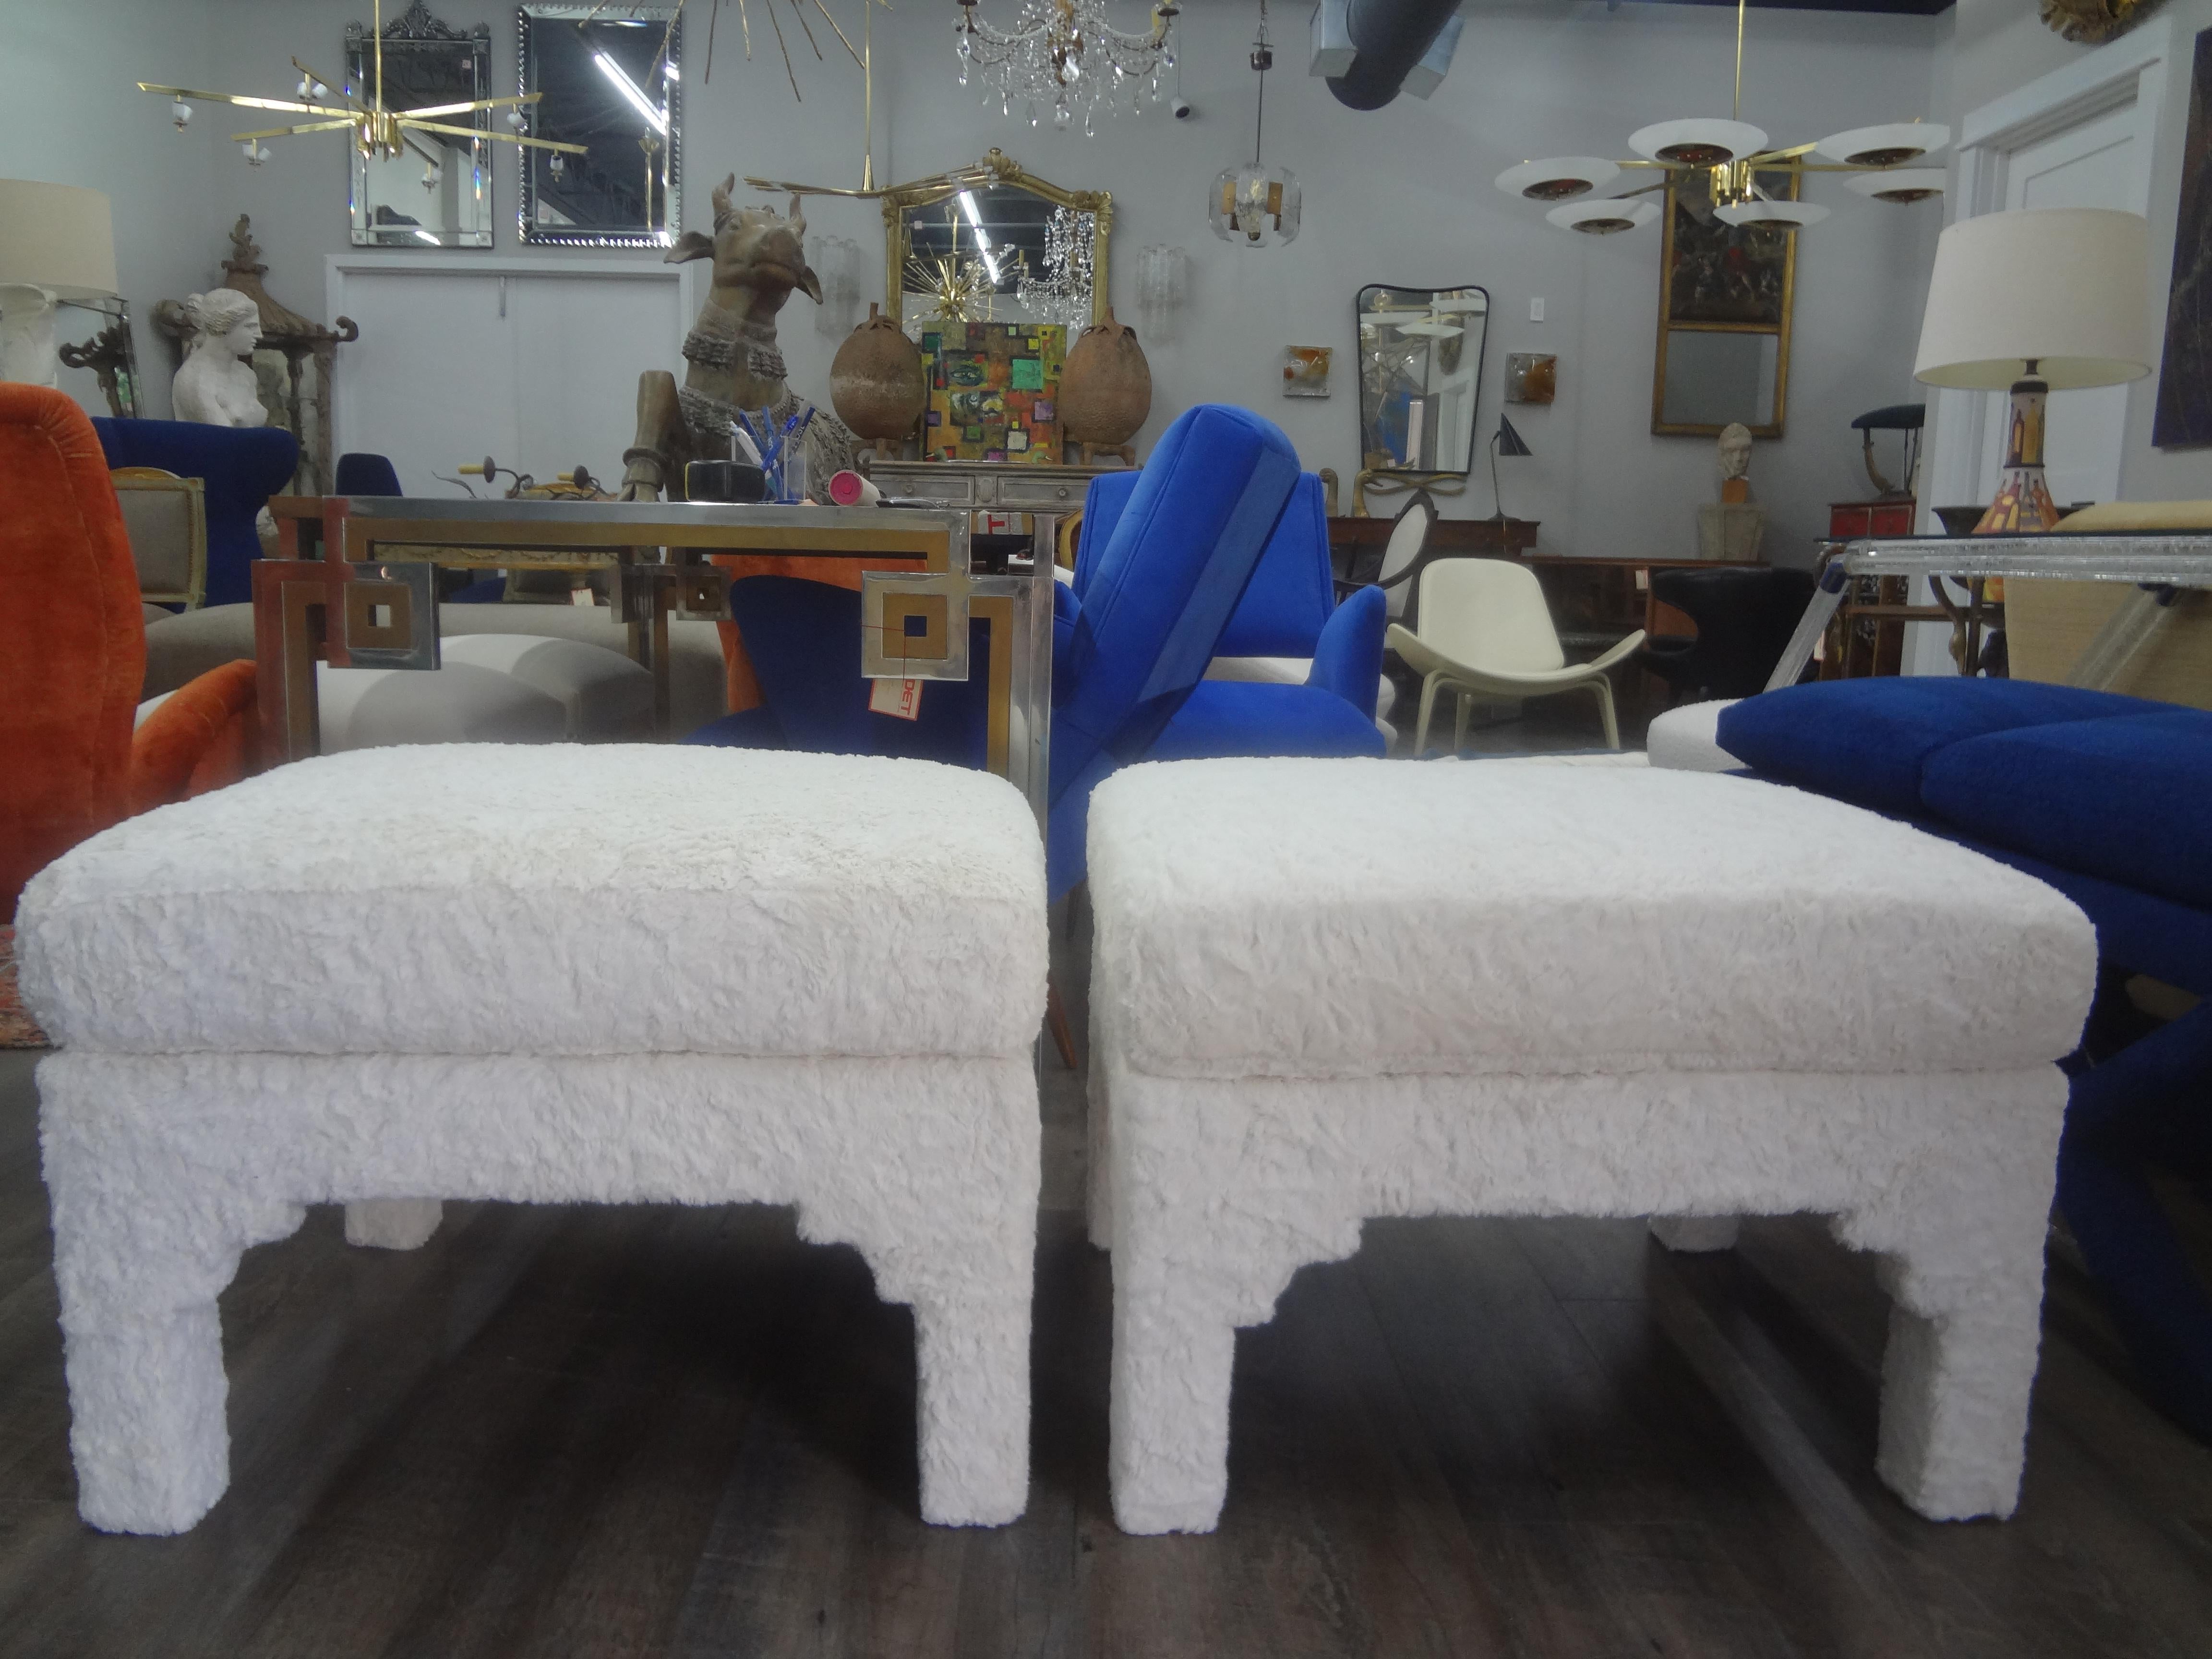 Pair Of Billy Baldwin Style Parsons Ottomans.
Pair of Billy Baldwin Style Parsons ottomans, benches or stools. This stunning large pair of Hollywood Regency Billy Baldwin style square ottomans, benches, poufs or stools have been professionally